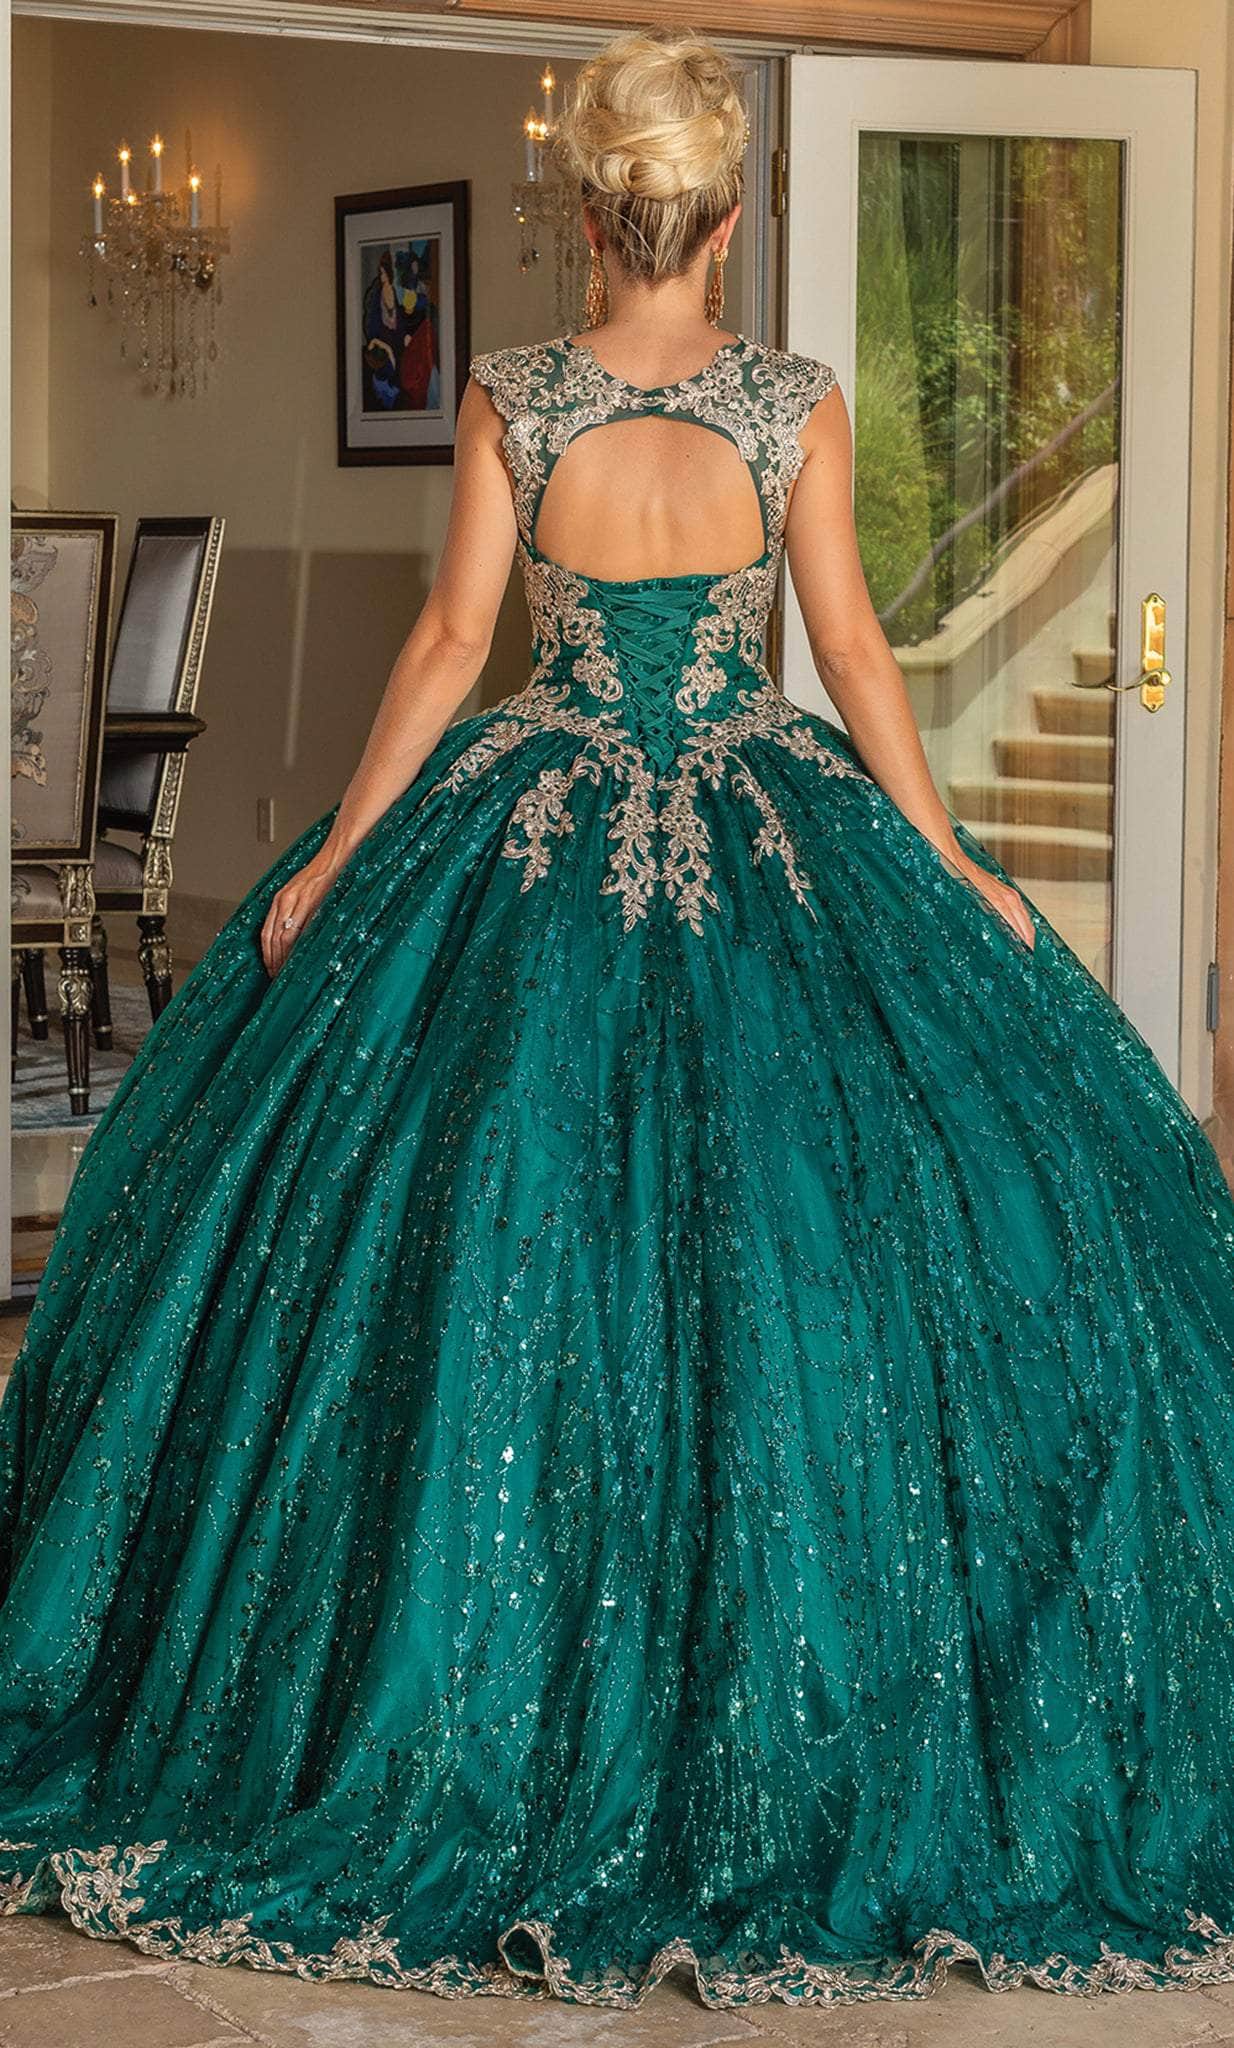 Dancing Queen 1478 - Sweetheart Embellished Ballgown Special Occasion Dress